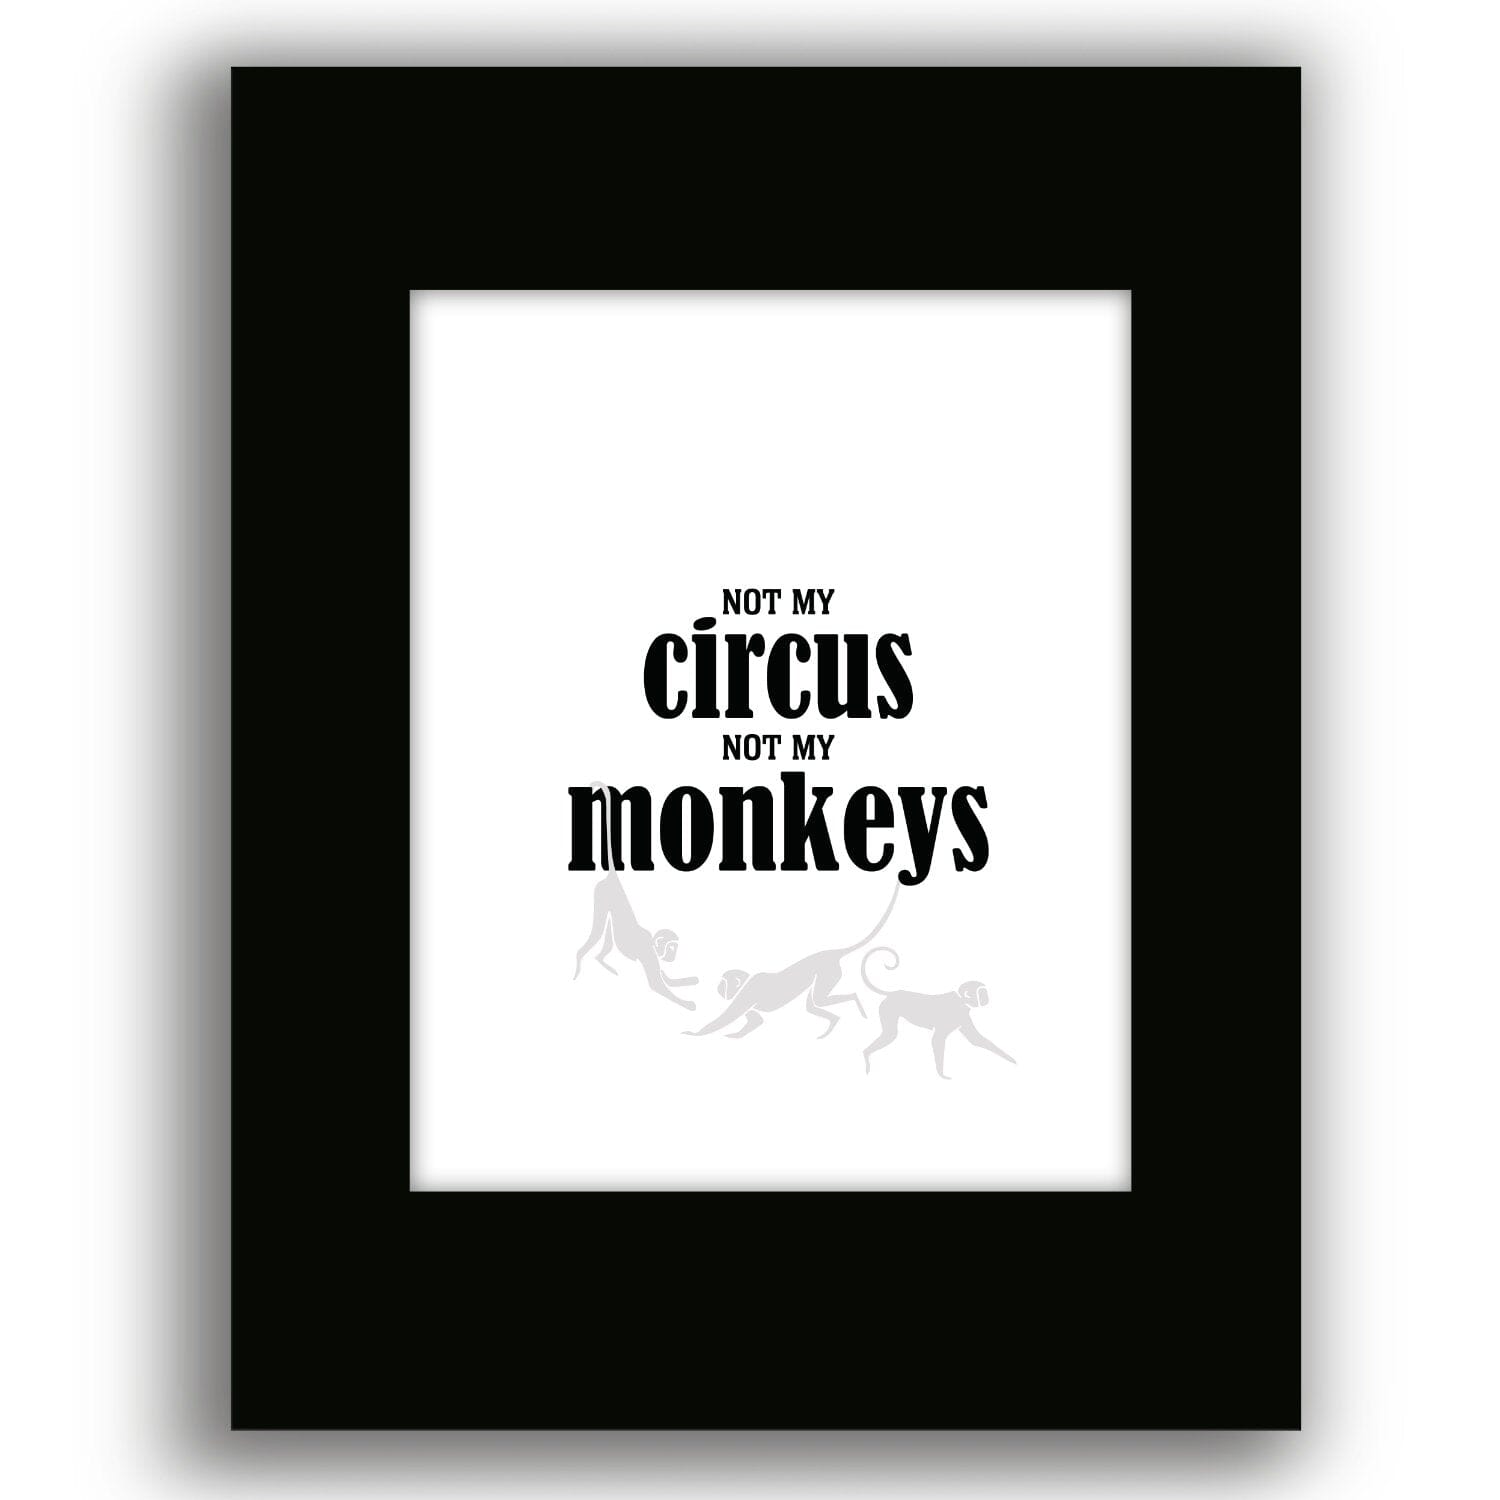 Wise and Witty Poster - Not My Circus, Not My Monkeys Wise and Wiseass Quotes Song Lyrics Art 